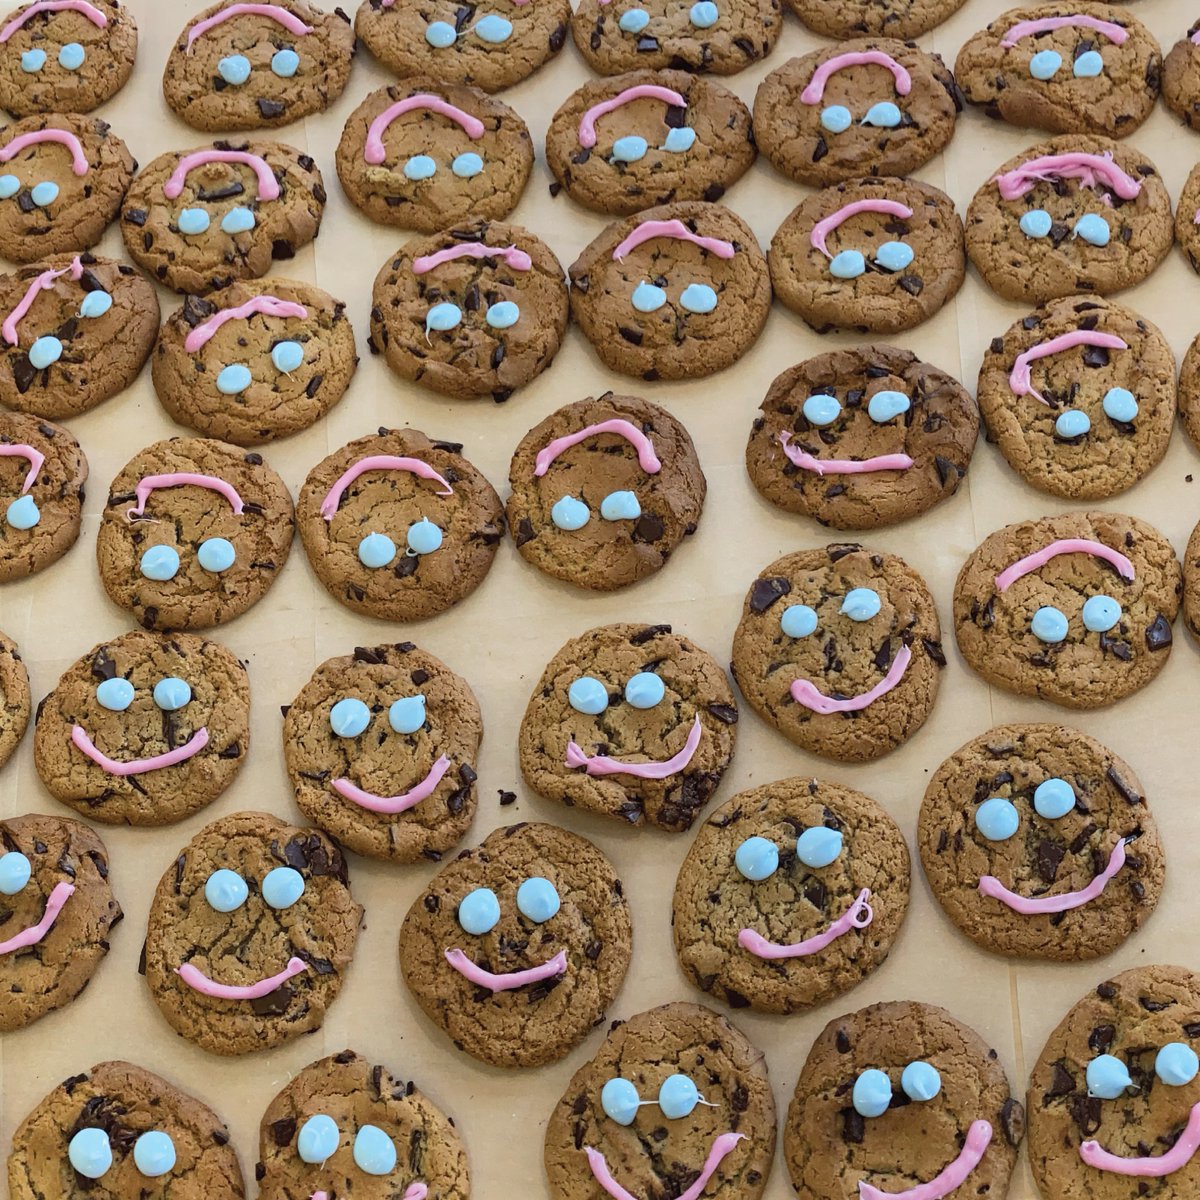 Today is the LAST DAY to get #smilecookies at your local Tims ‼️🚨 Thank you to all who have already purchased theirs, we are smiling with you! 😊🍪